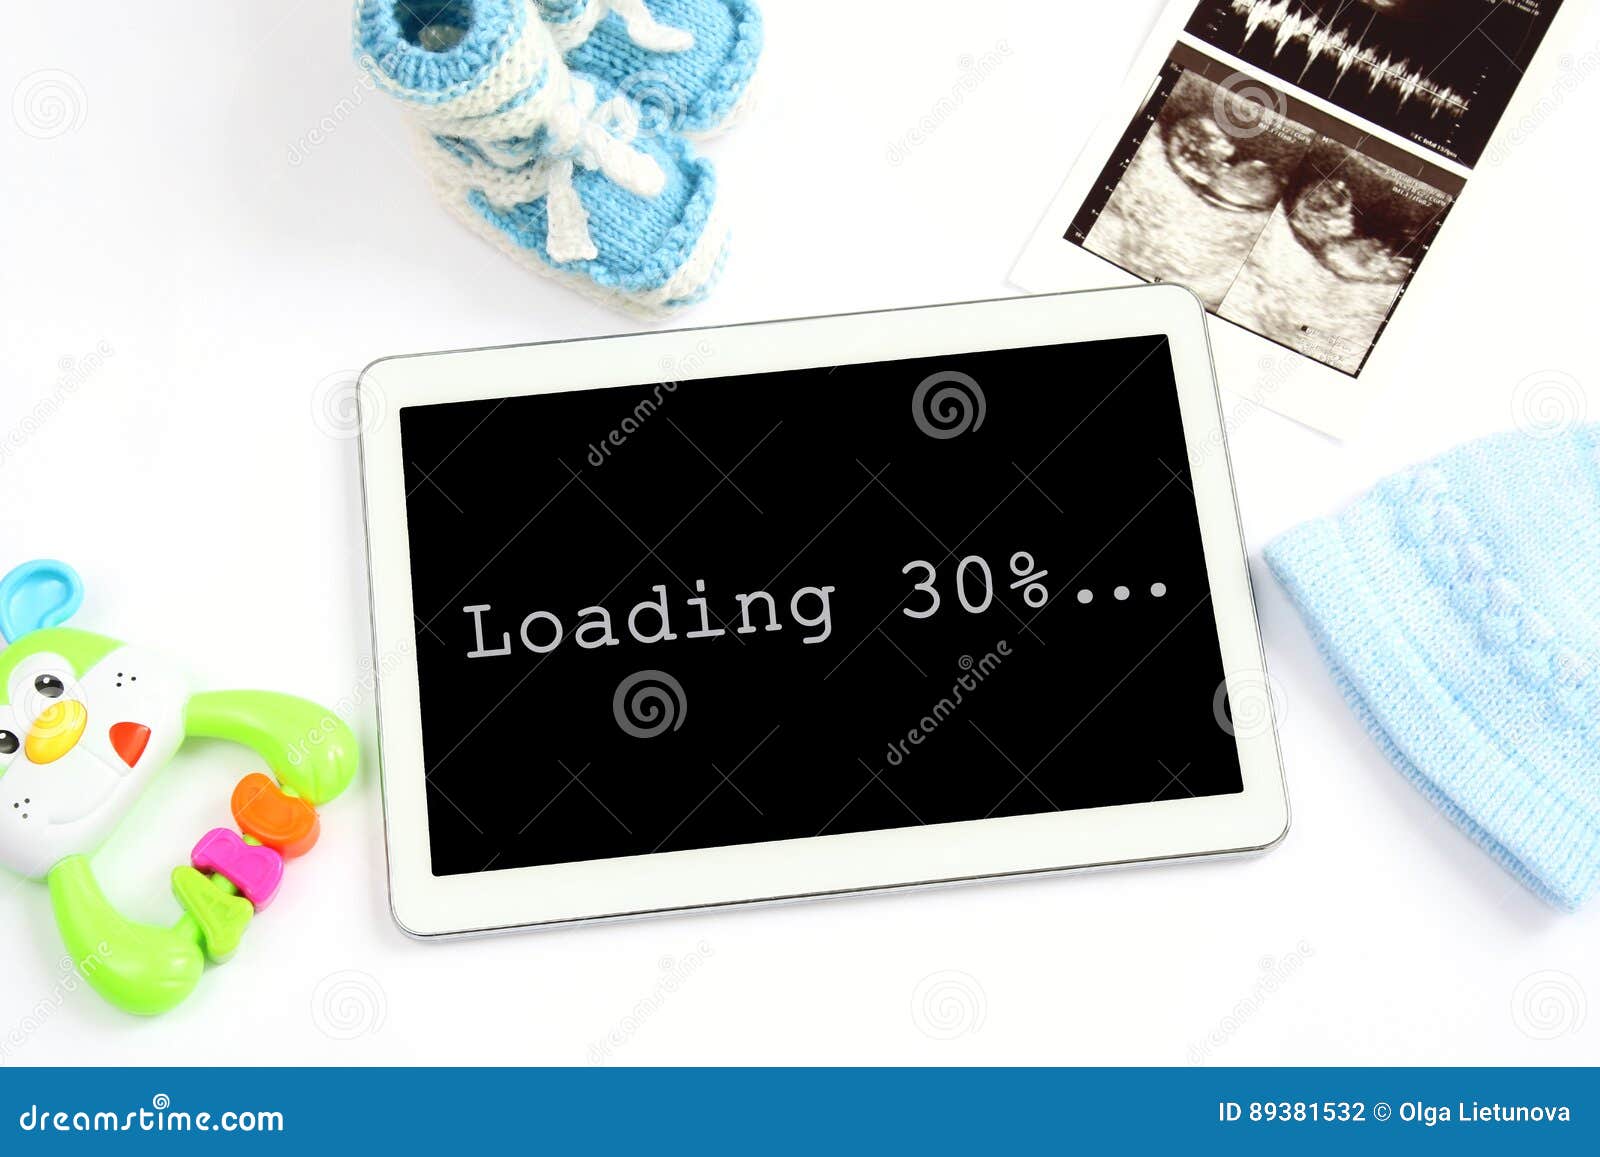 136 Loading Percent Photos Free Royalty Free Stock Photos From Dreamstime